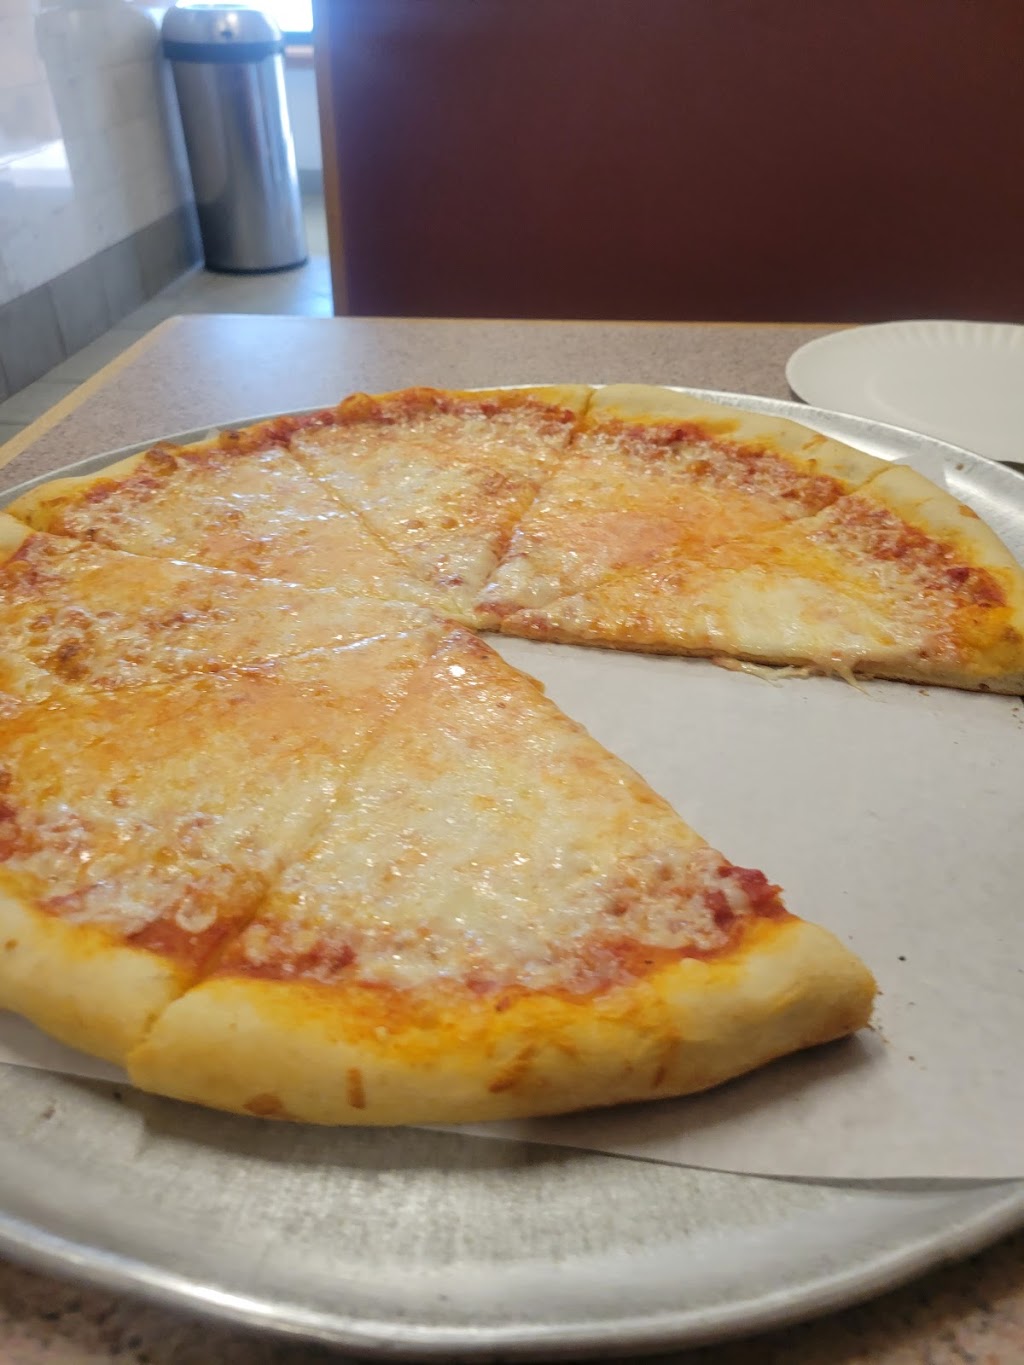 Angelos Pizza Co | 216 W Beidler Rd, King of Prussia, PA 19406 | Phone: (610) 265-4148